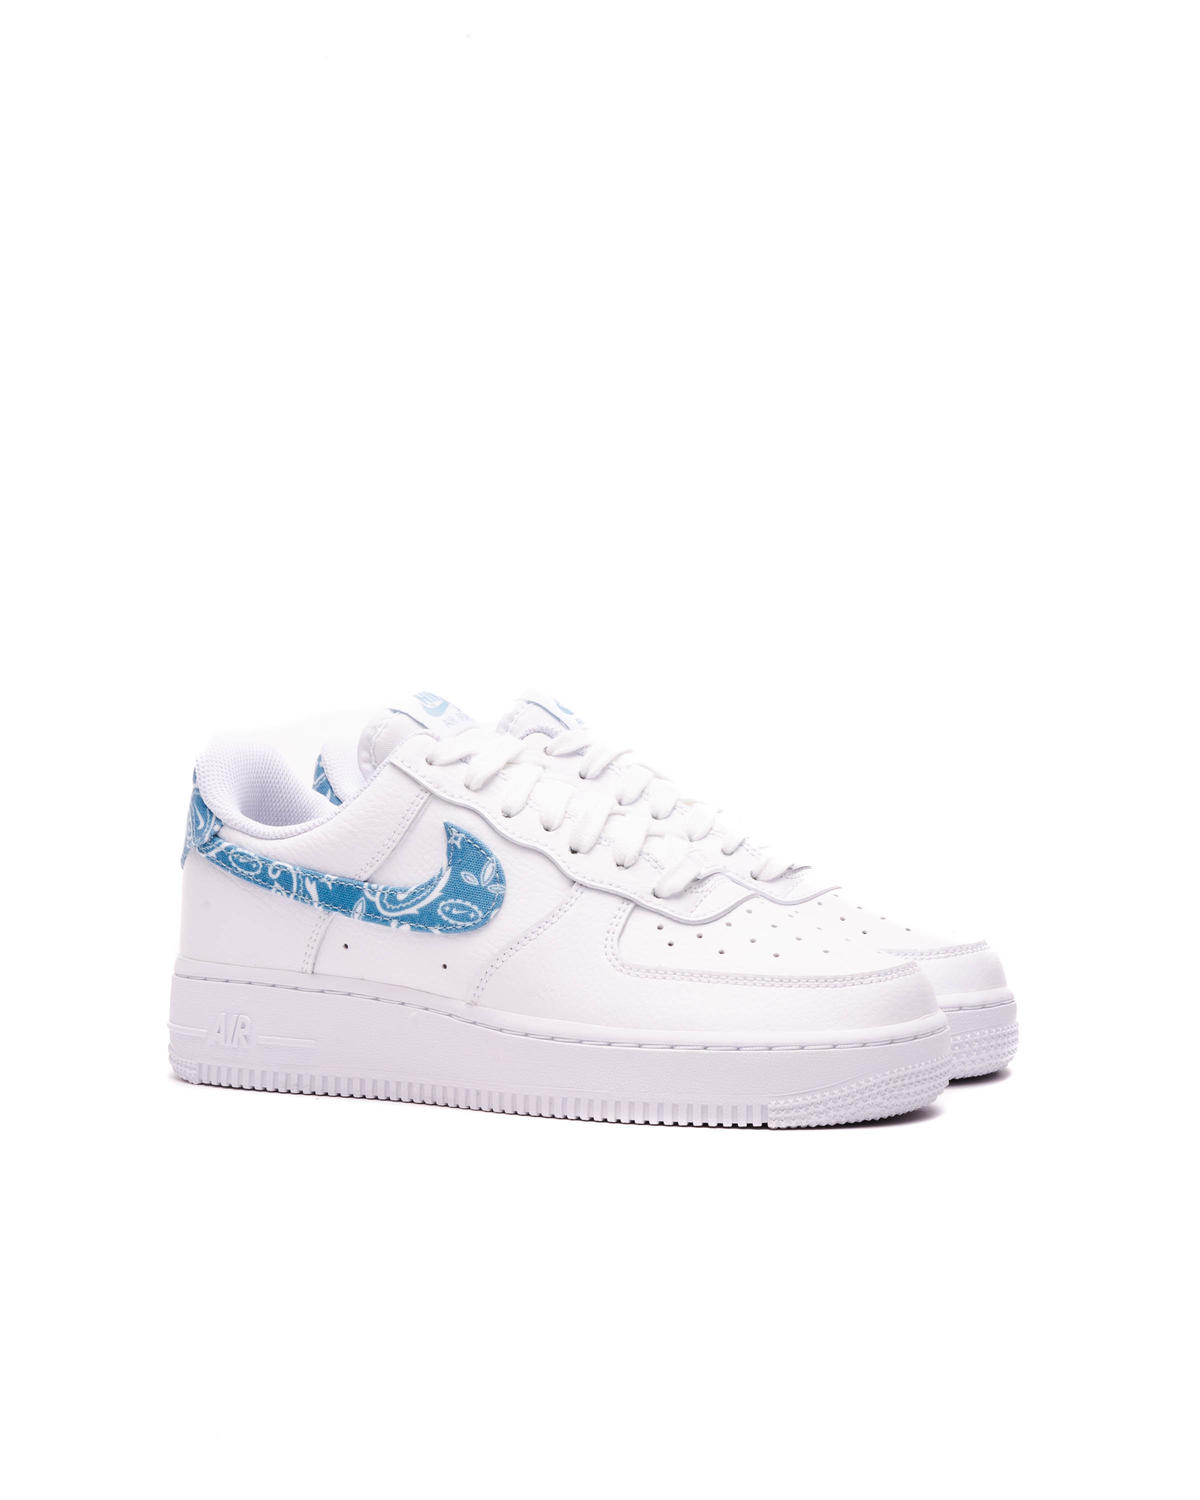 Nike WMNS AIR FORCE 1 '07 ESS | DH4406-100 | AFEW STORE